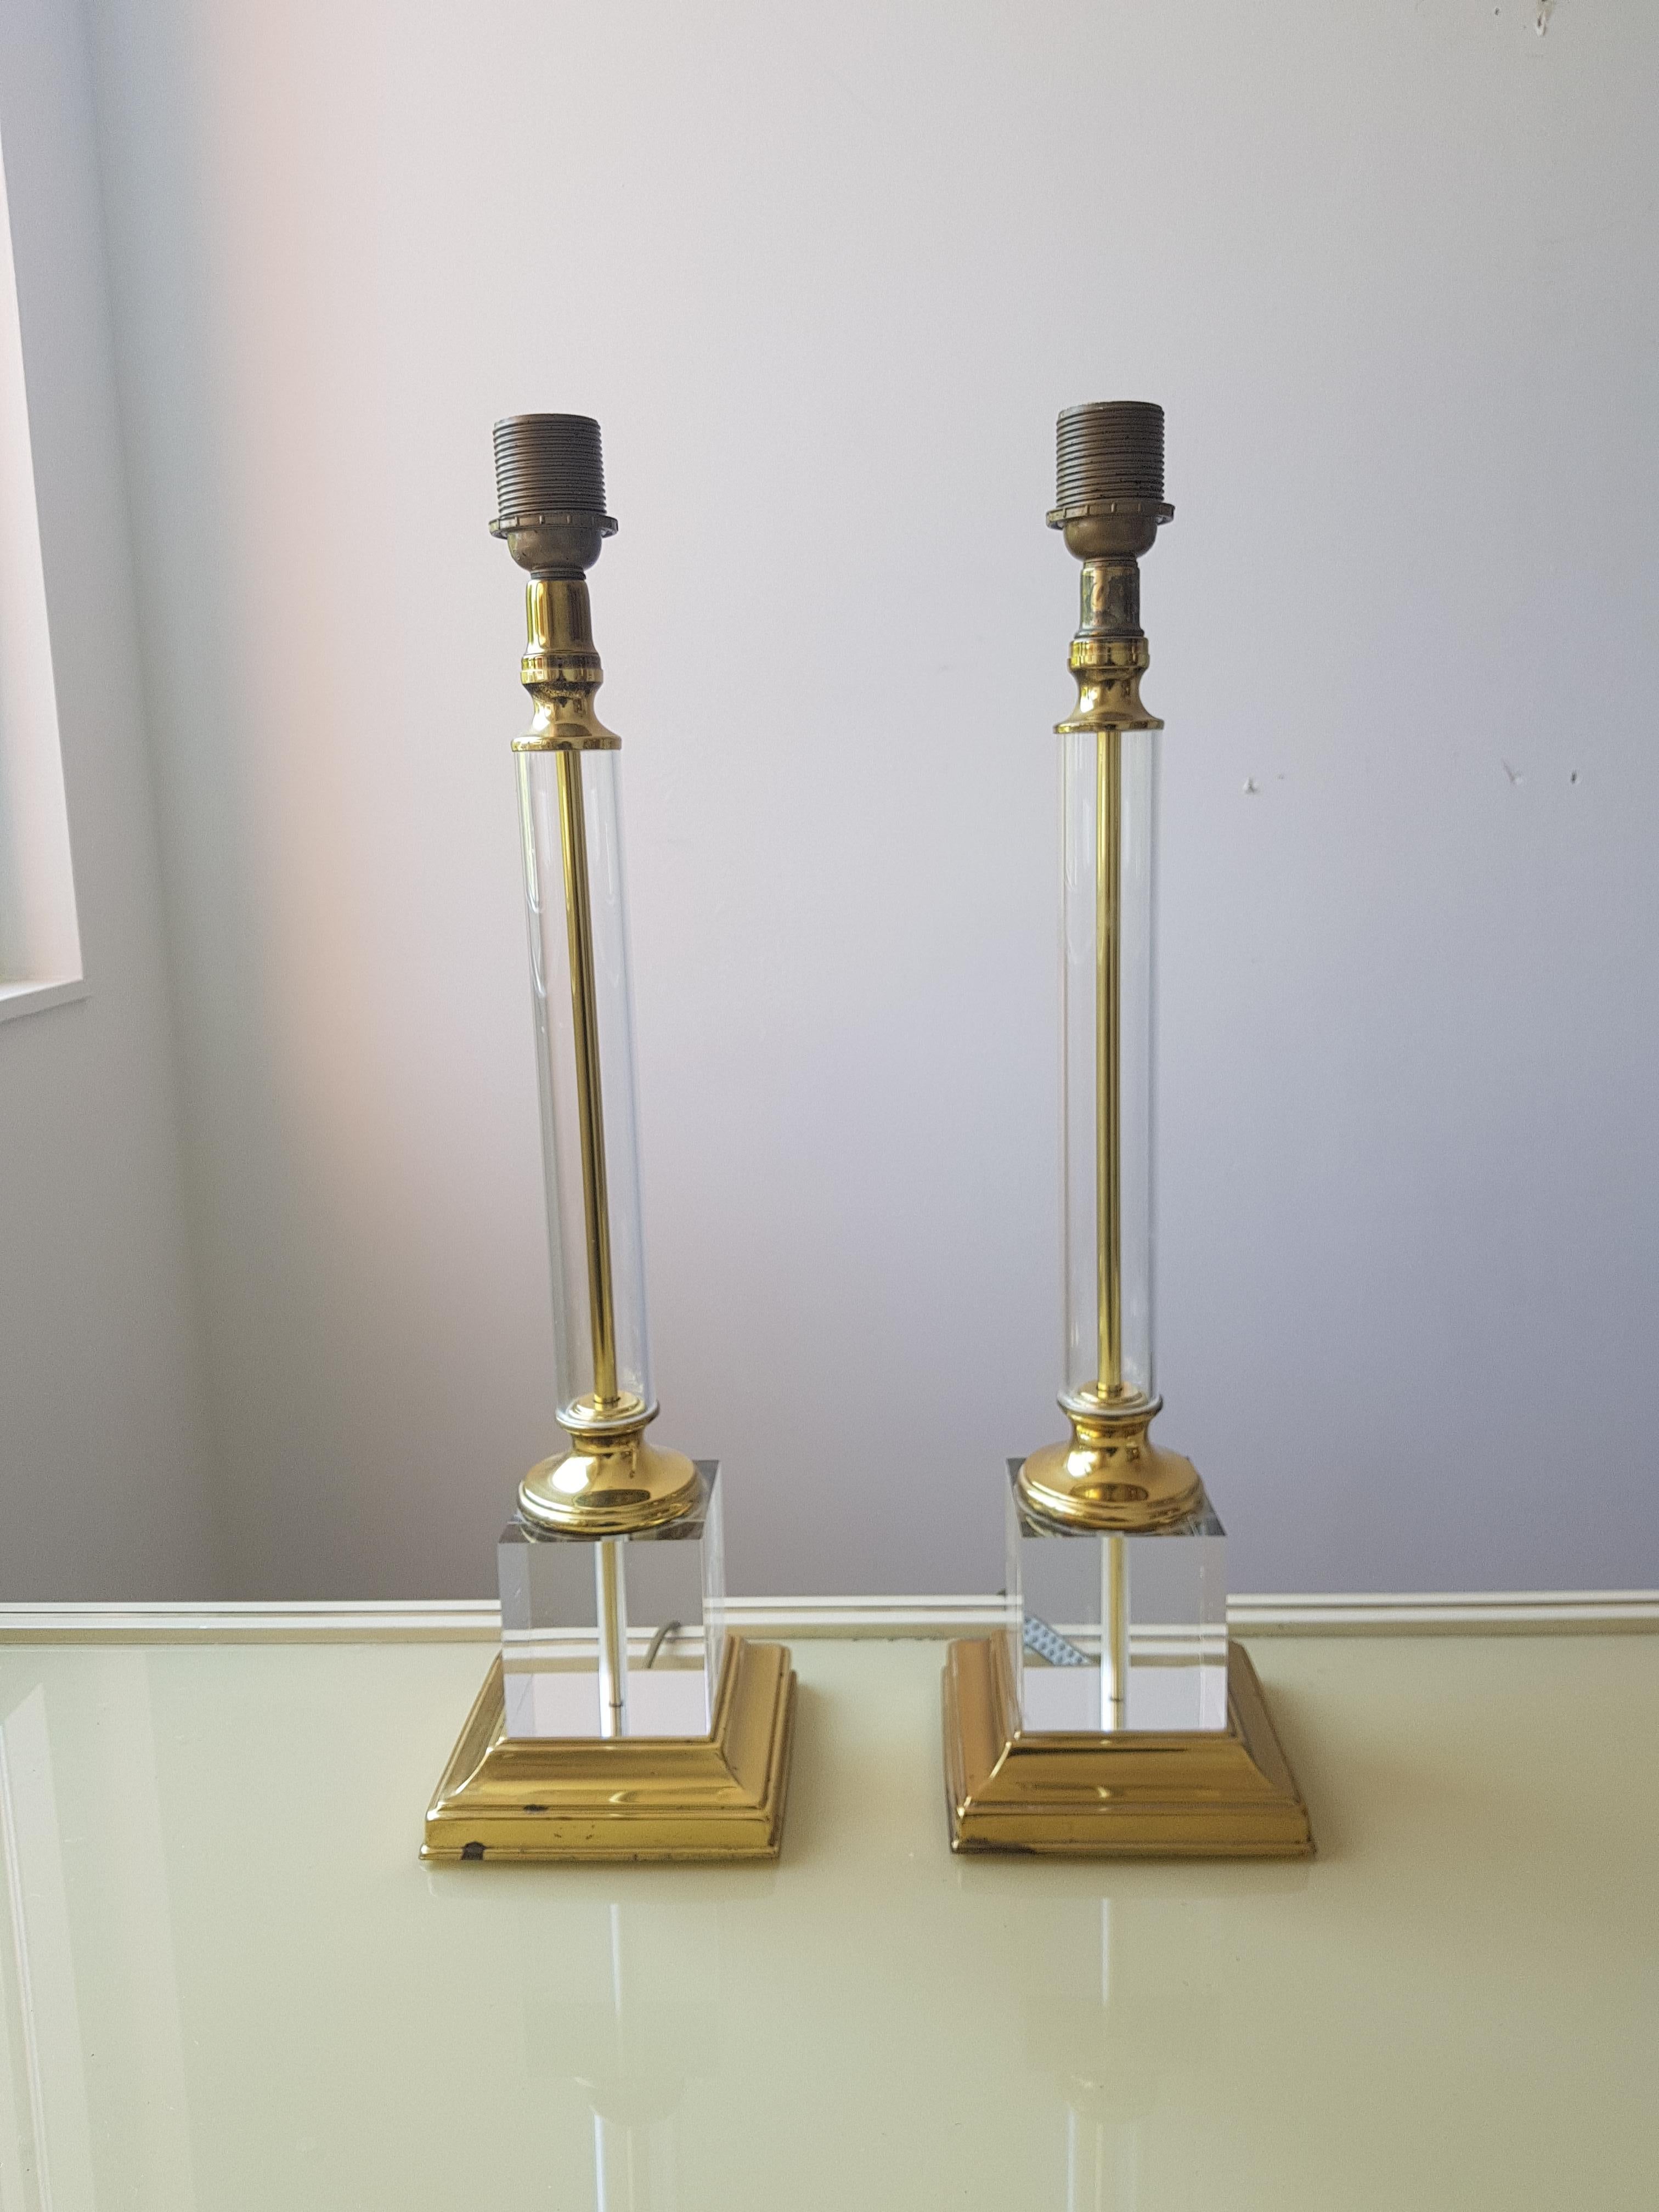 A pair of large brass, glass and Lucite lamps, from the 1970s. The lamps have a brass foot and than a Lucite cube on which the glass tube is mounted, this truly the work of an designer but which I am still not sure.
Comes with free bulbs.

Rewired: